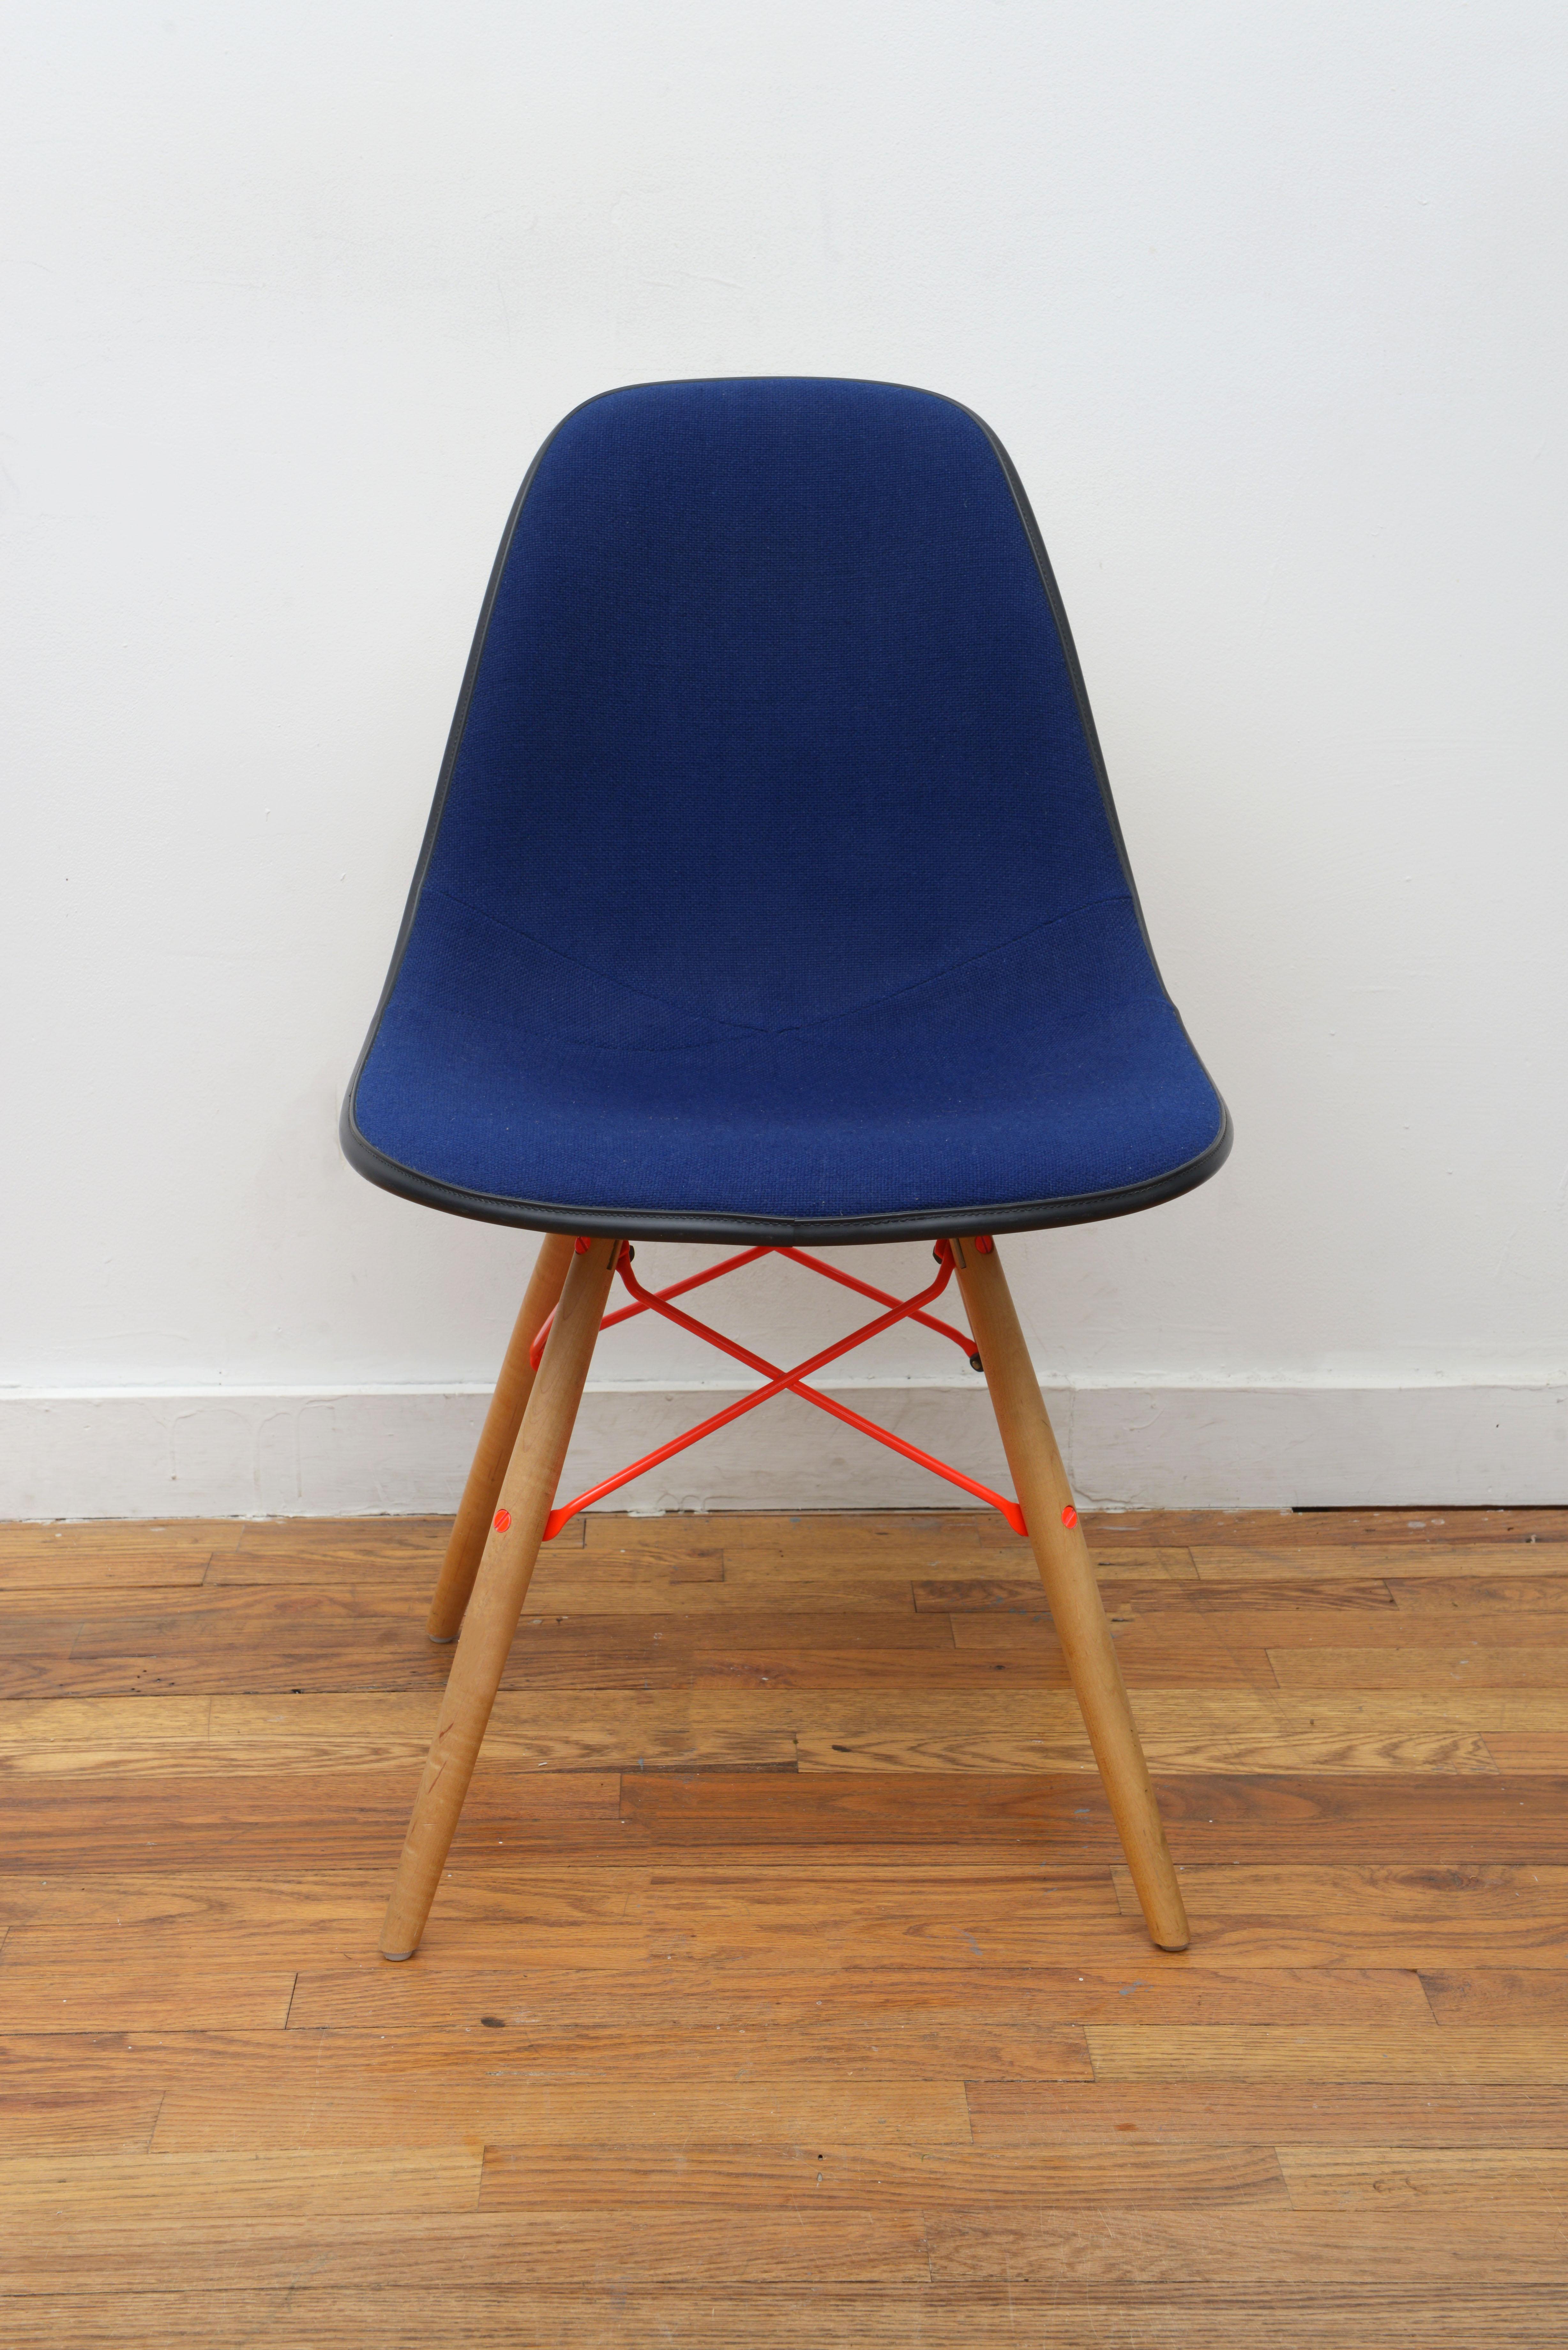 The color combination on this single DSW blue upholstered shell chair with neon orange stretchers is simple amazing! Designed by Charles and Ray Eames for Herman Miller in the 1950s (Signed with Herman Miller logo on bottom). The dining or side